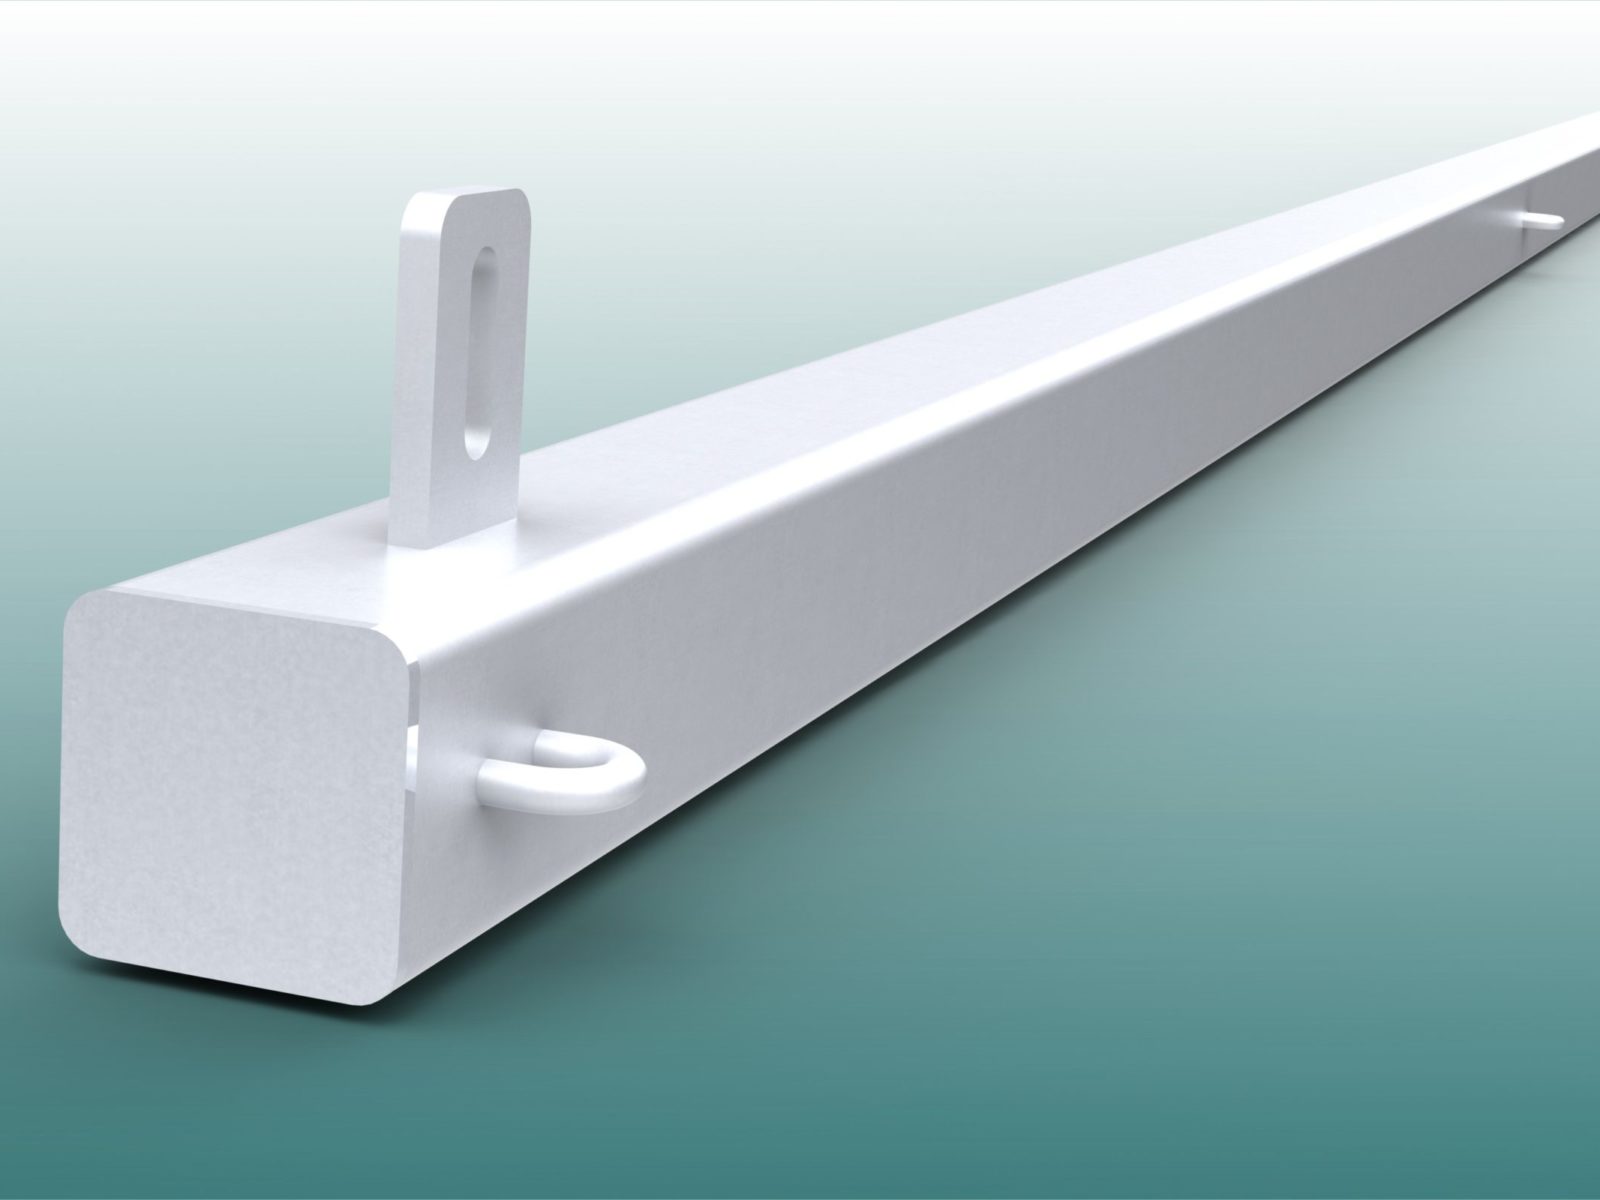 Ball stop posts made of aluminum, height 3.0 m, profile: 80 x 80 mm from artec Sportgeräte